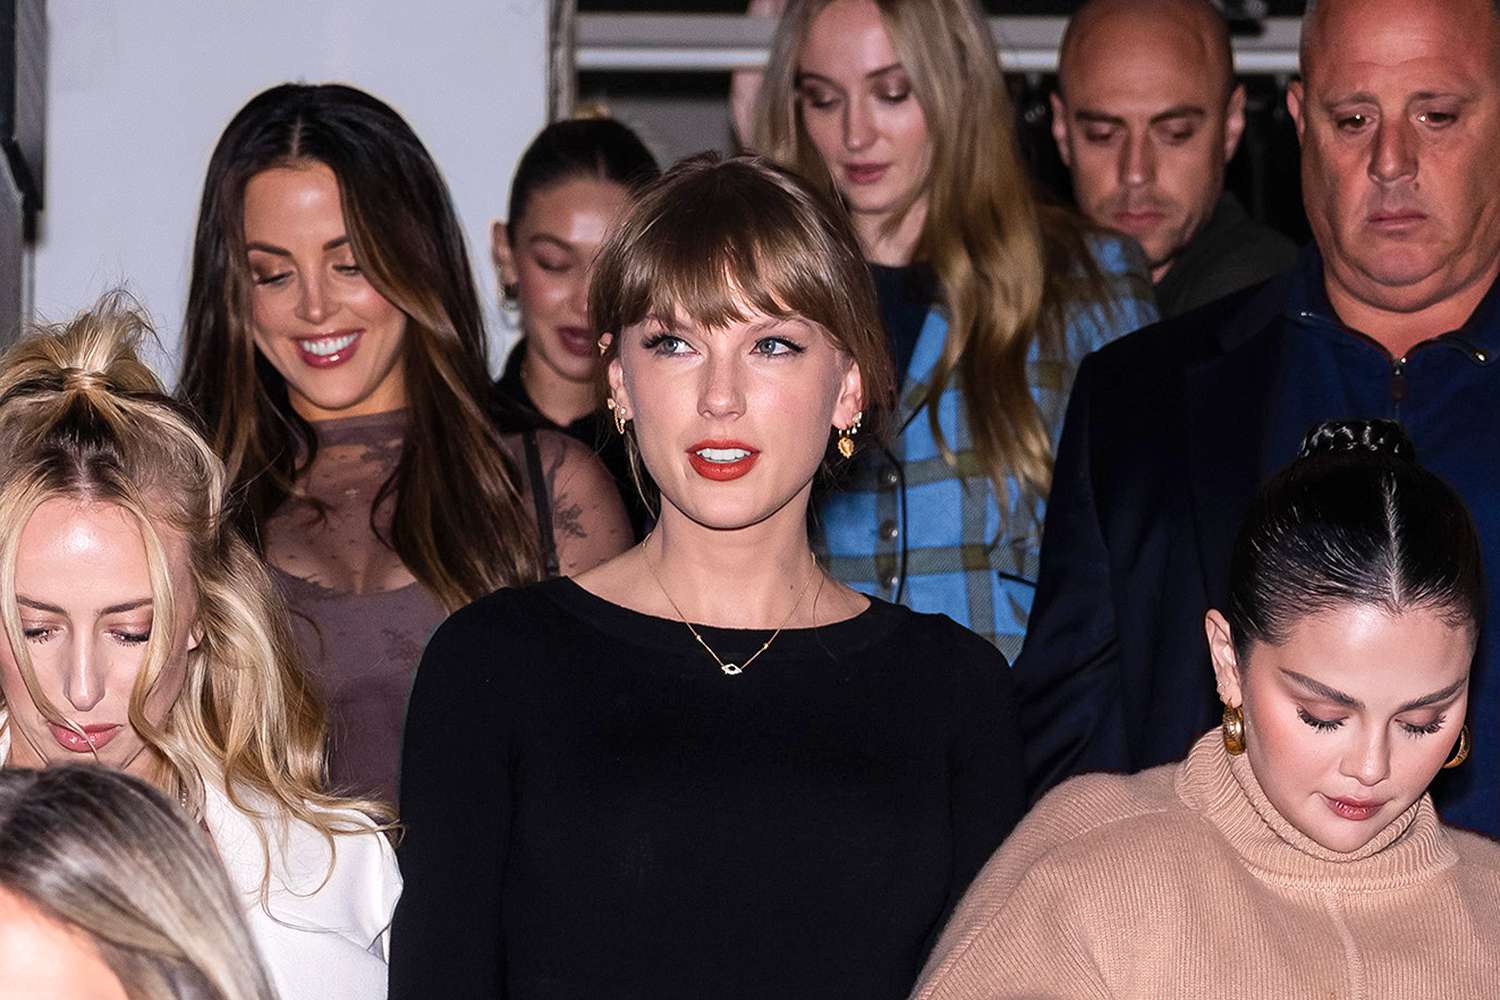 Taylor Swift Shares A Night Out With Selena Gomez, Gigi Hadid, And Brittany Mahomes